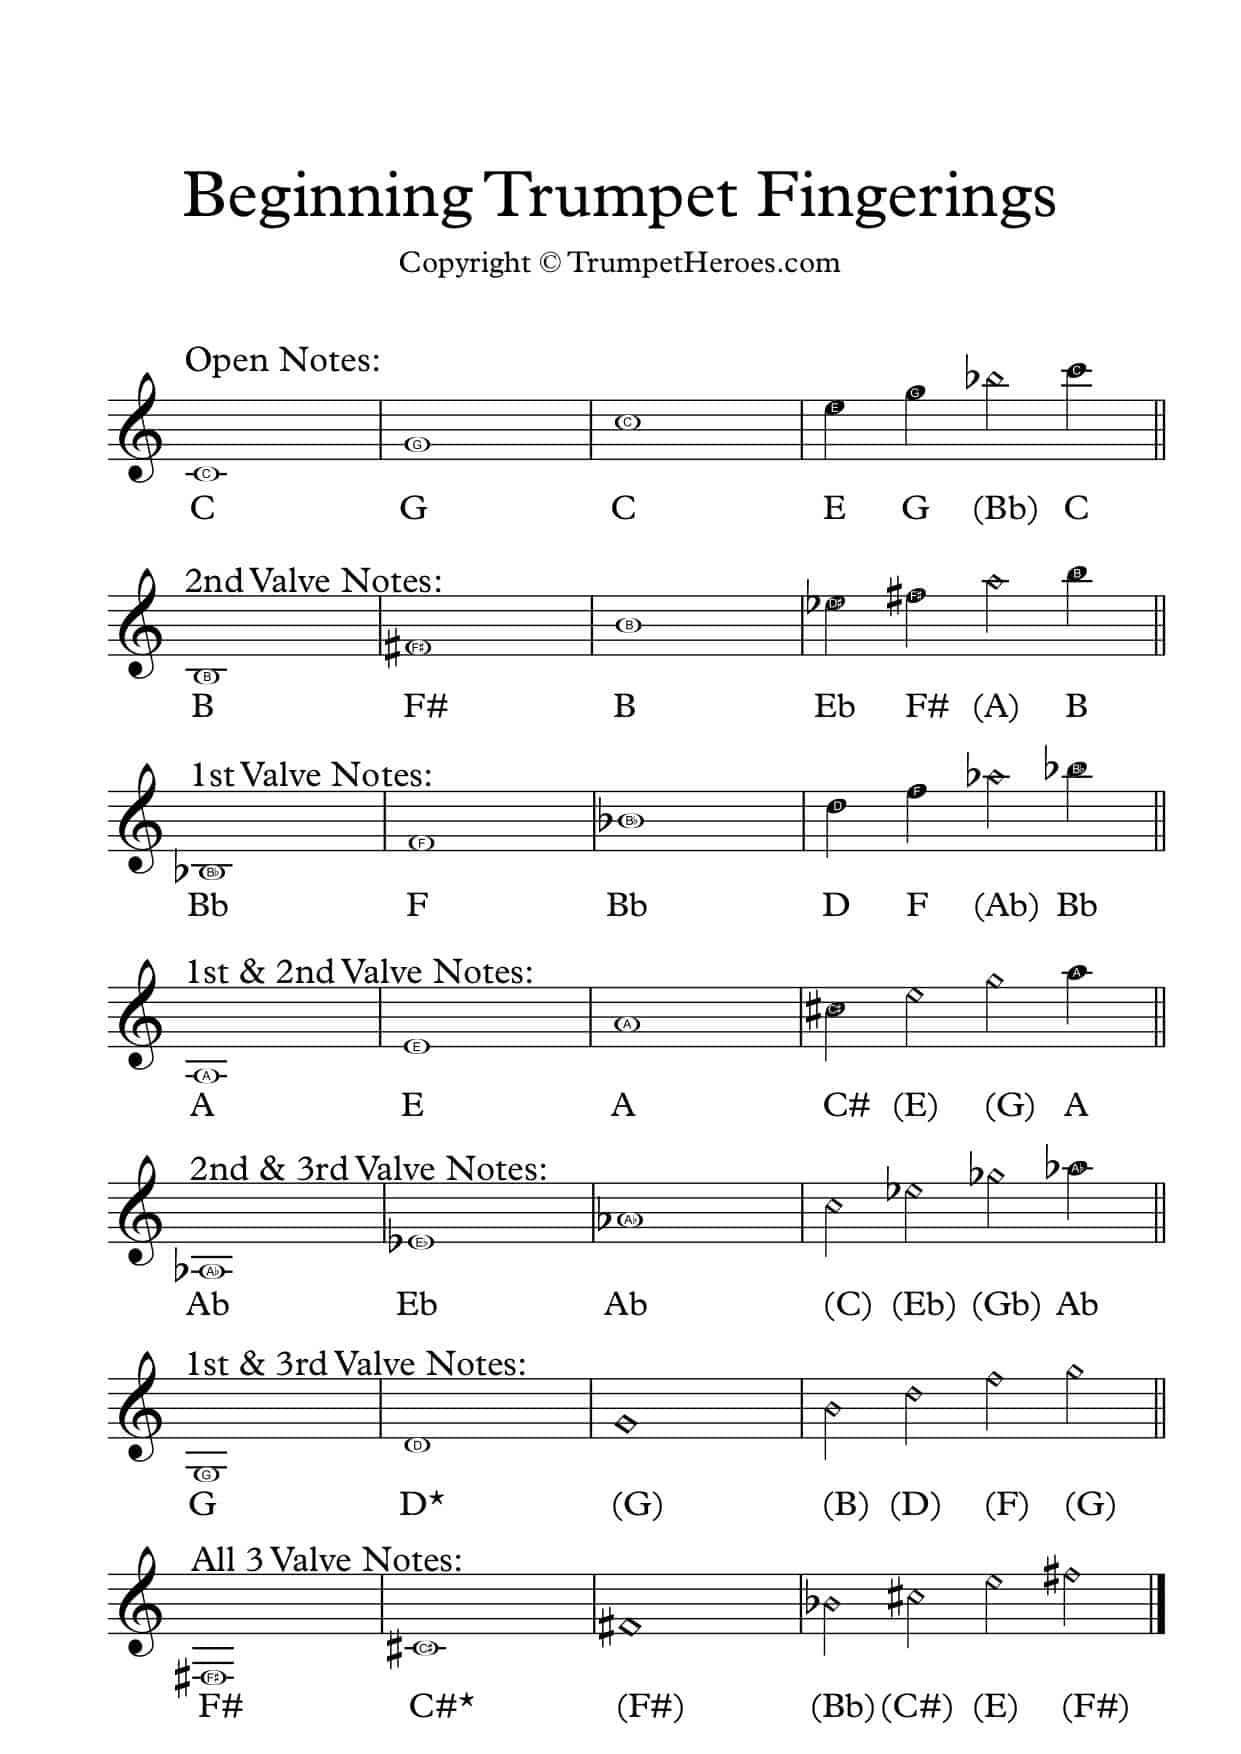 Trumpet Fingering Chart for Beginners - shows basic trumpet notes for learning to play the trumpet